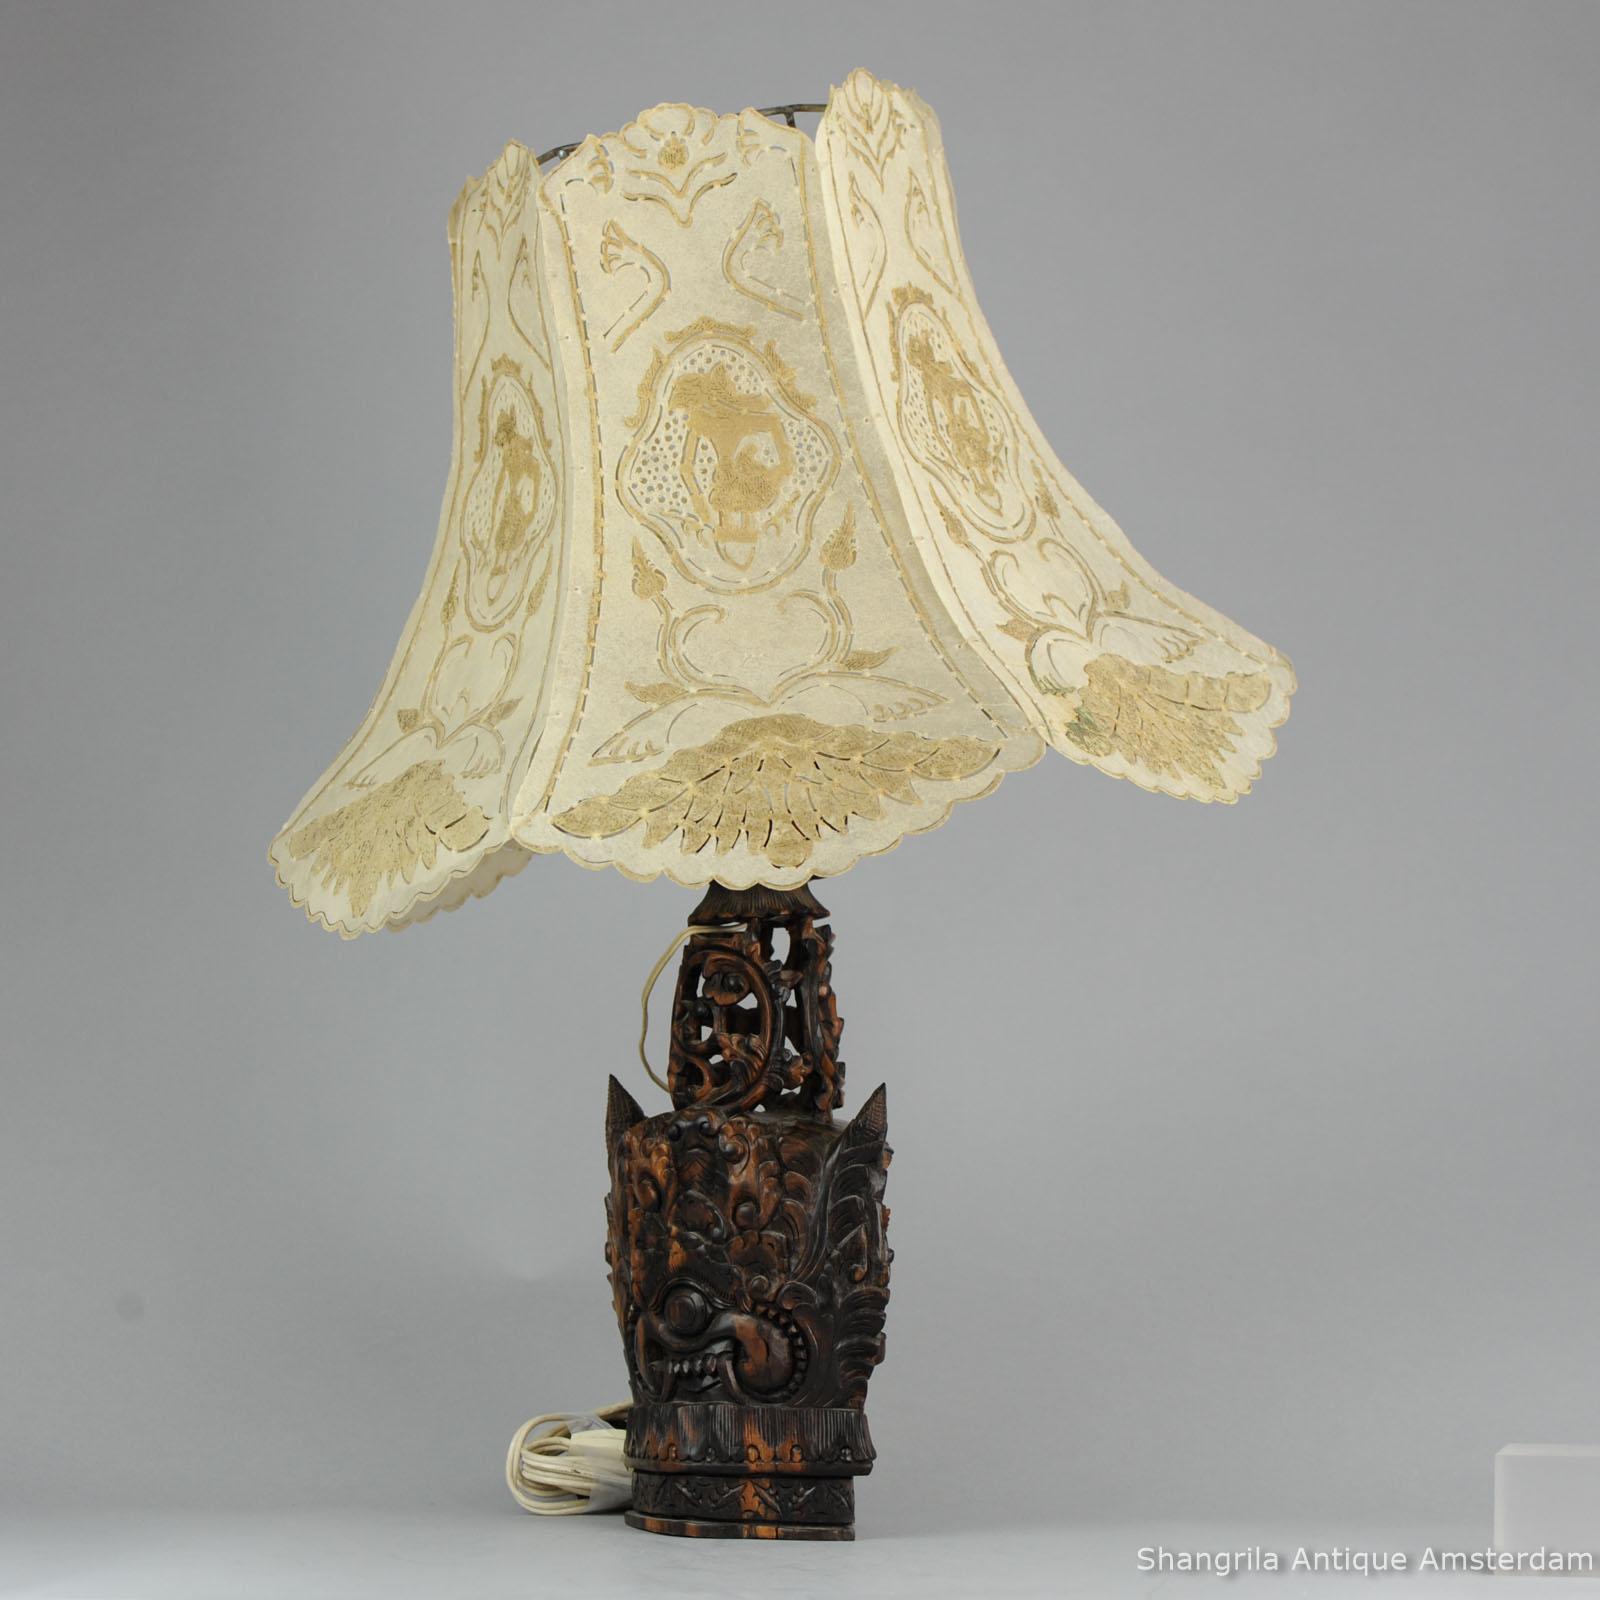 Great piece of wood carving. Turned into a lamp.

Additional information:
Material: Wood
Type: Lamp
Region of Origin: India
Period: 20th century Qing (1661 - 1912)
Age: 19th century
Original/Reproduction: Original
Condition: Overall Condition A++++;